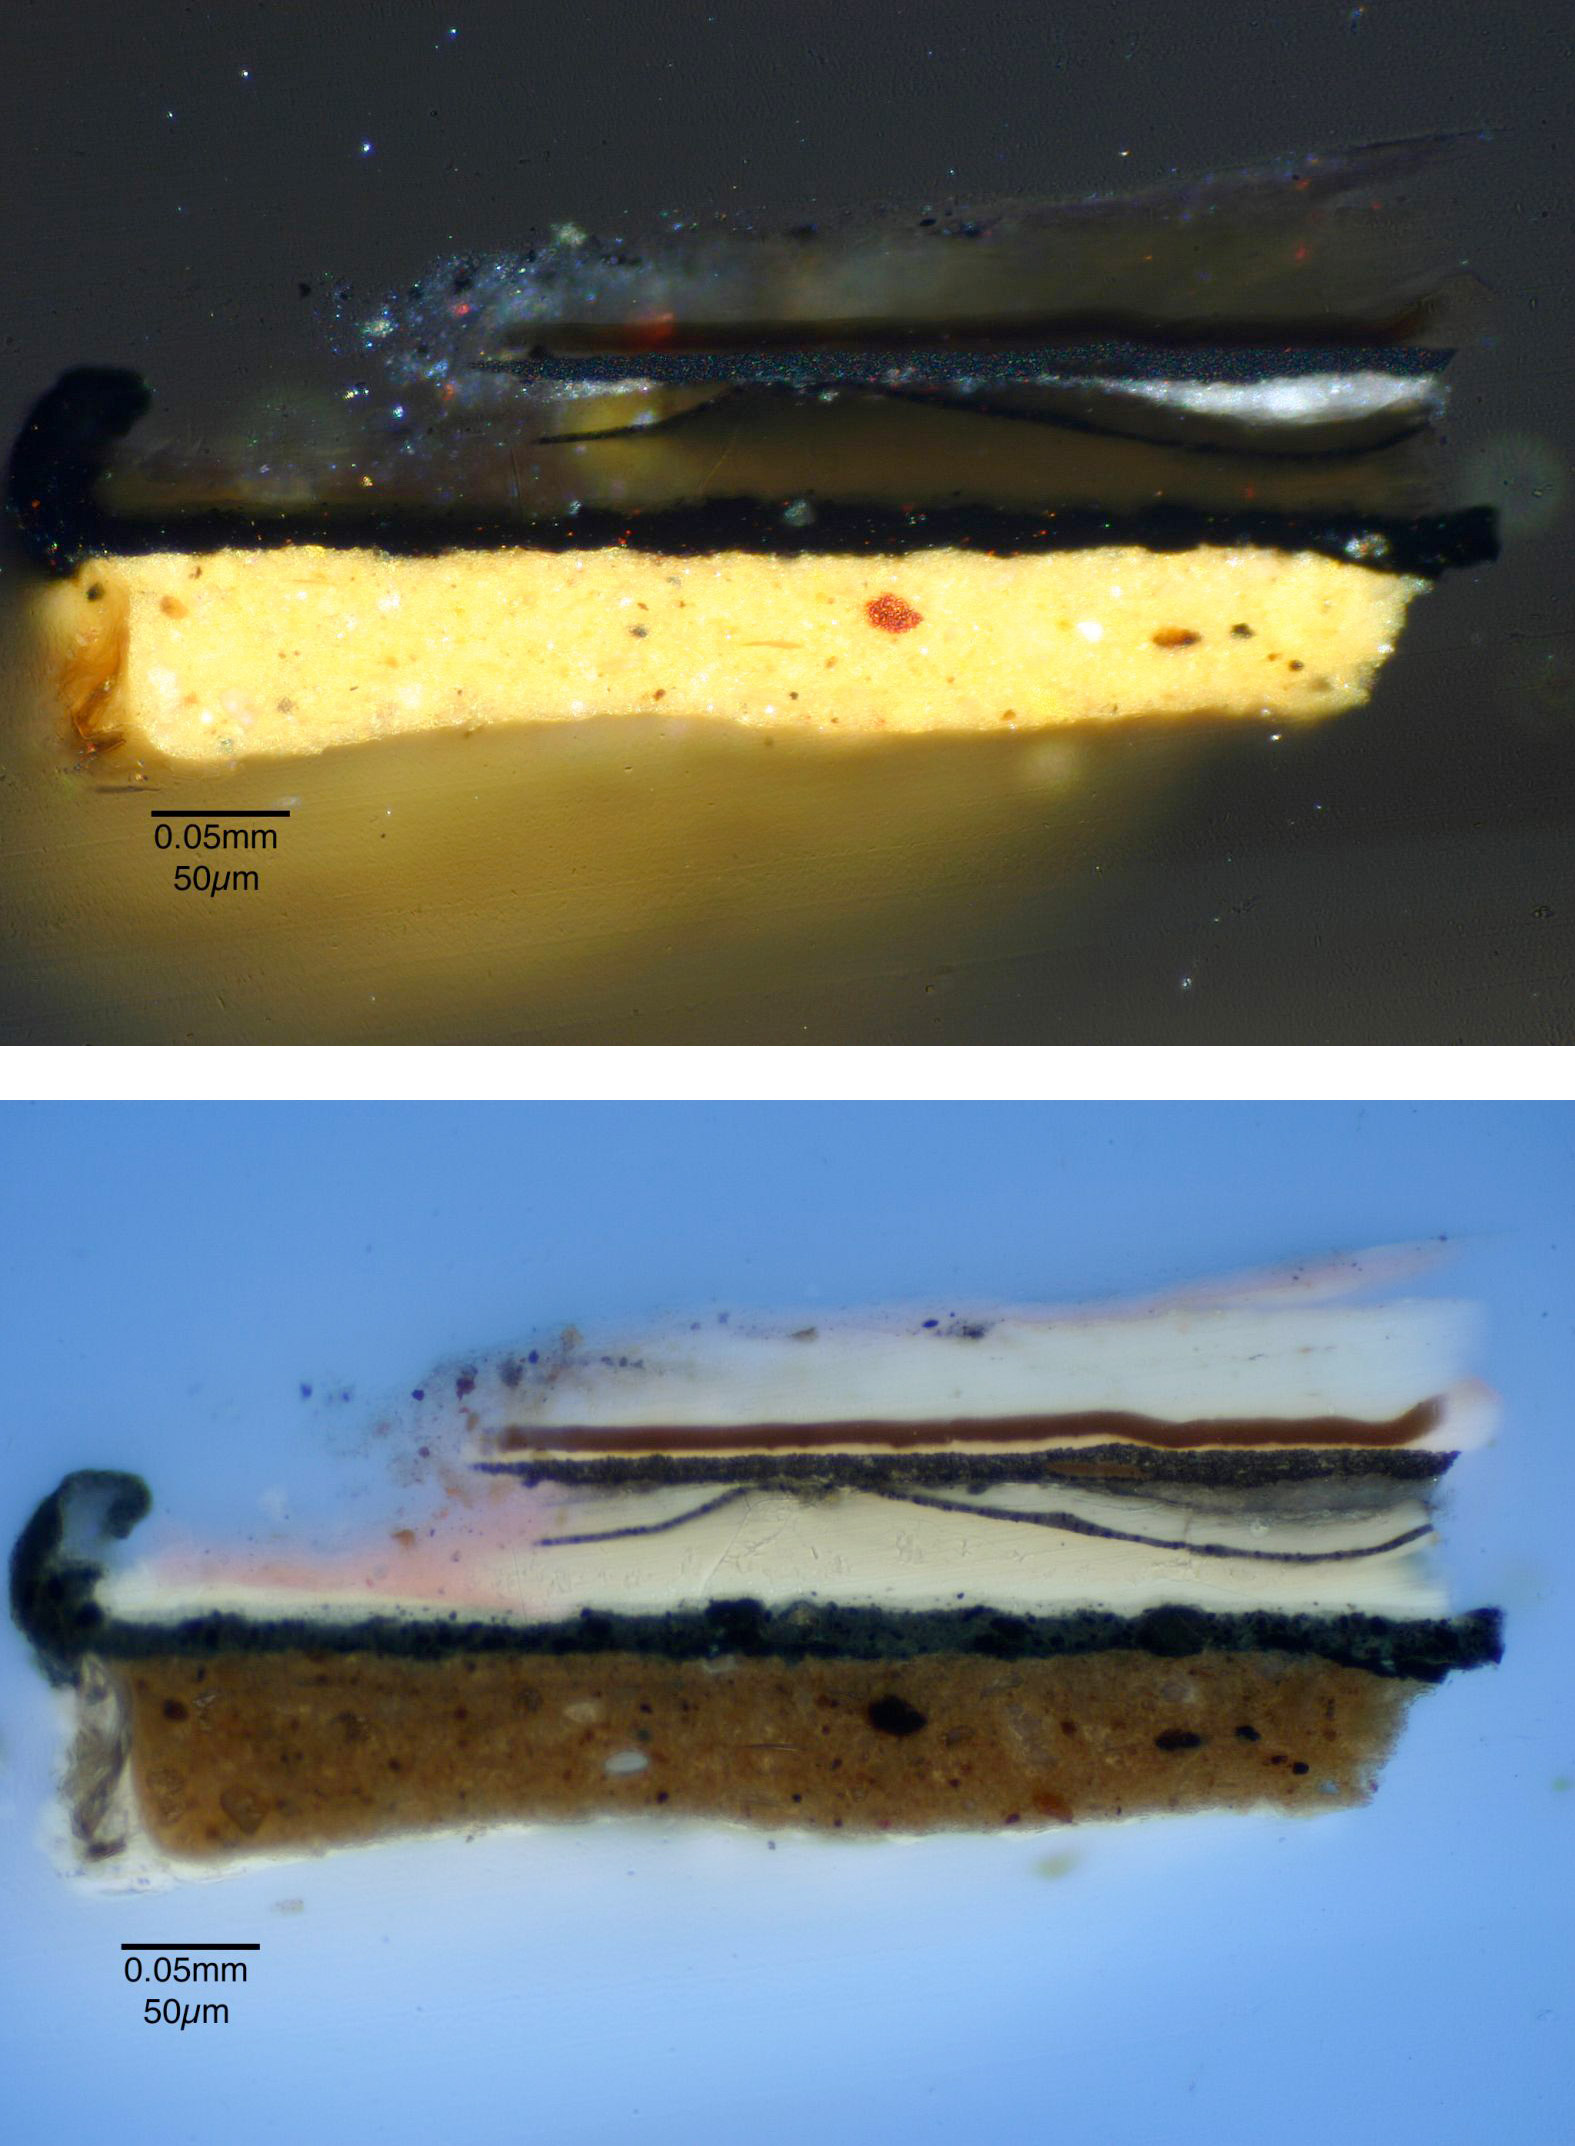 two cross-section photomicrographs revealing the multi-layer structure; the top shows the lacquer in shades of yellow and gold under visible light, the bottom in shades of blue, brown, black, and white under UV light